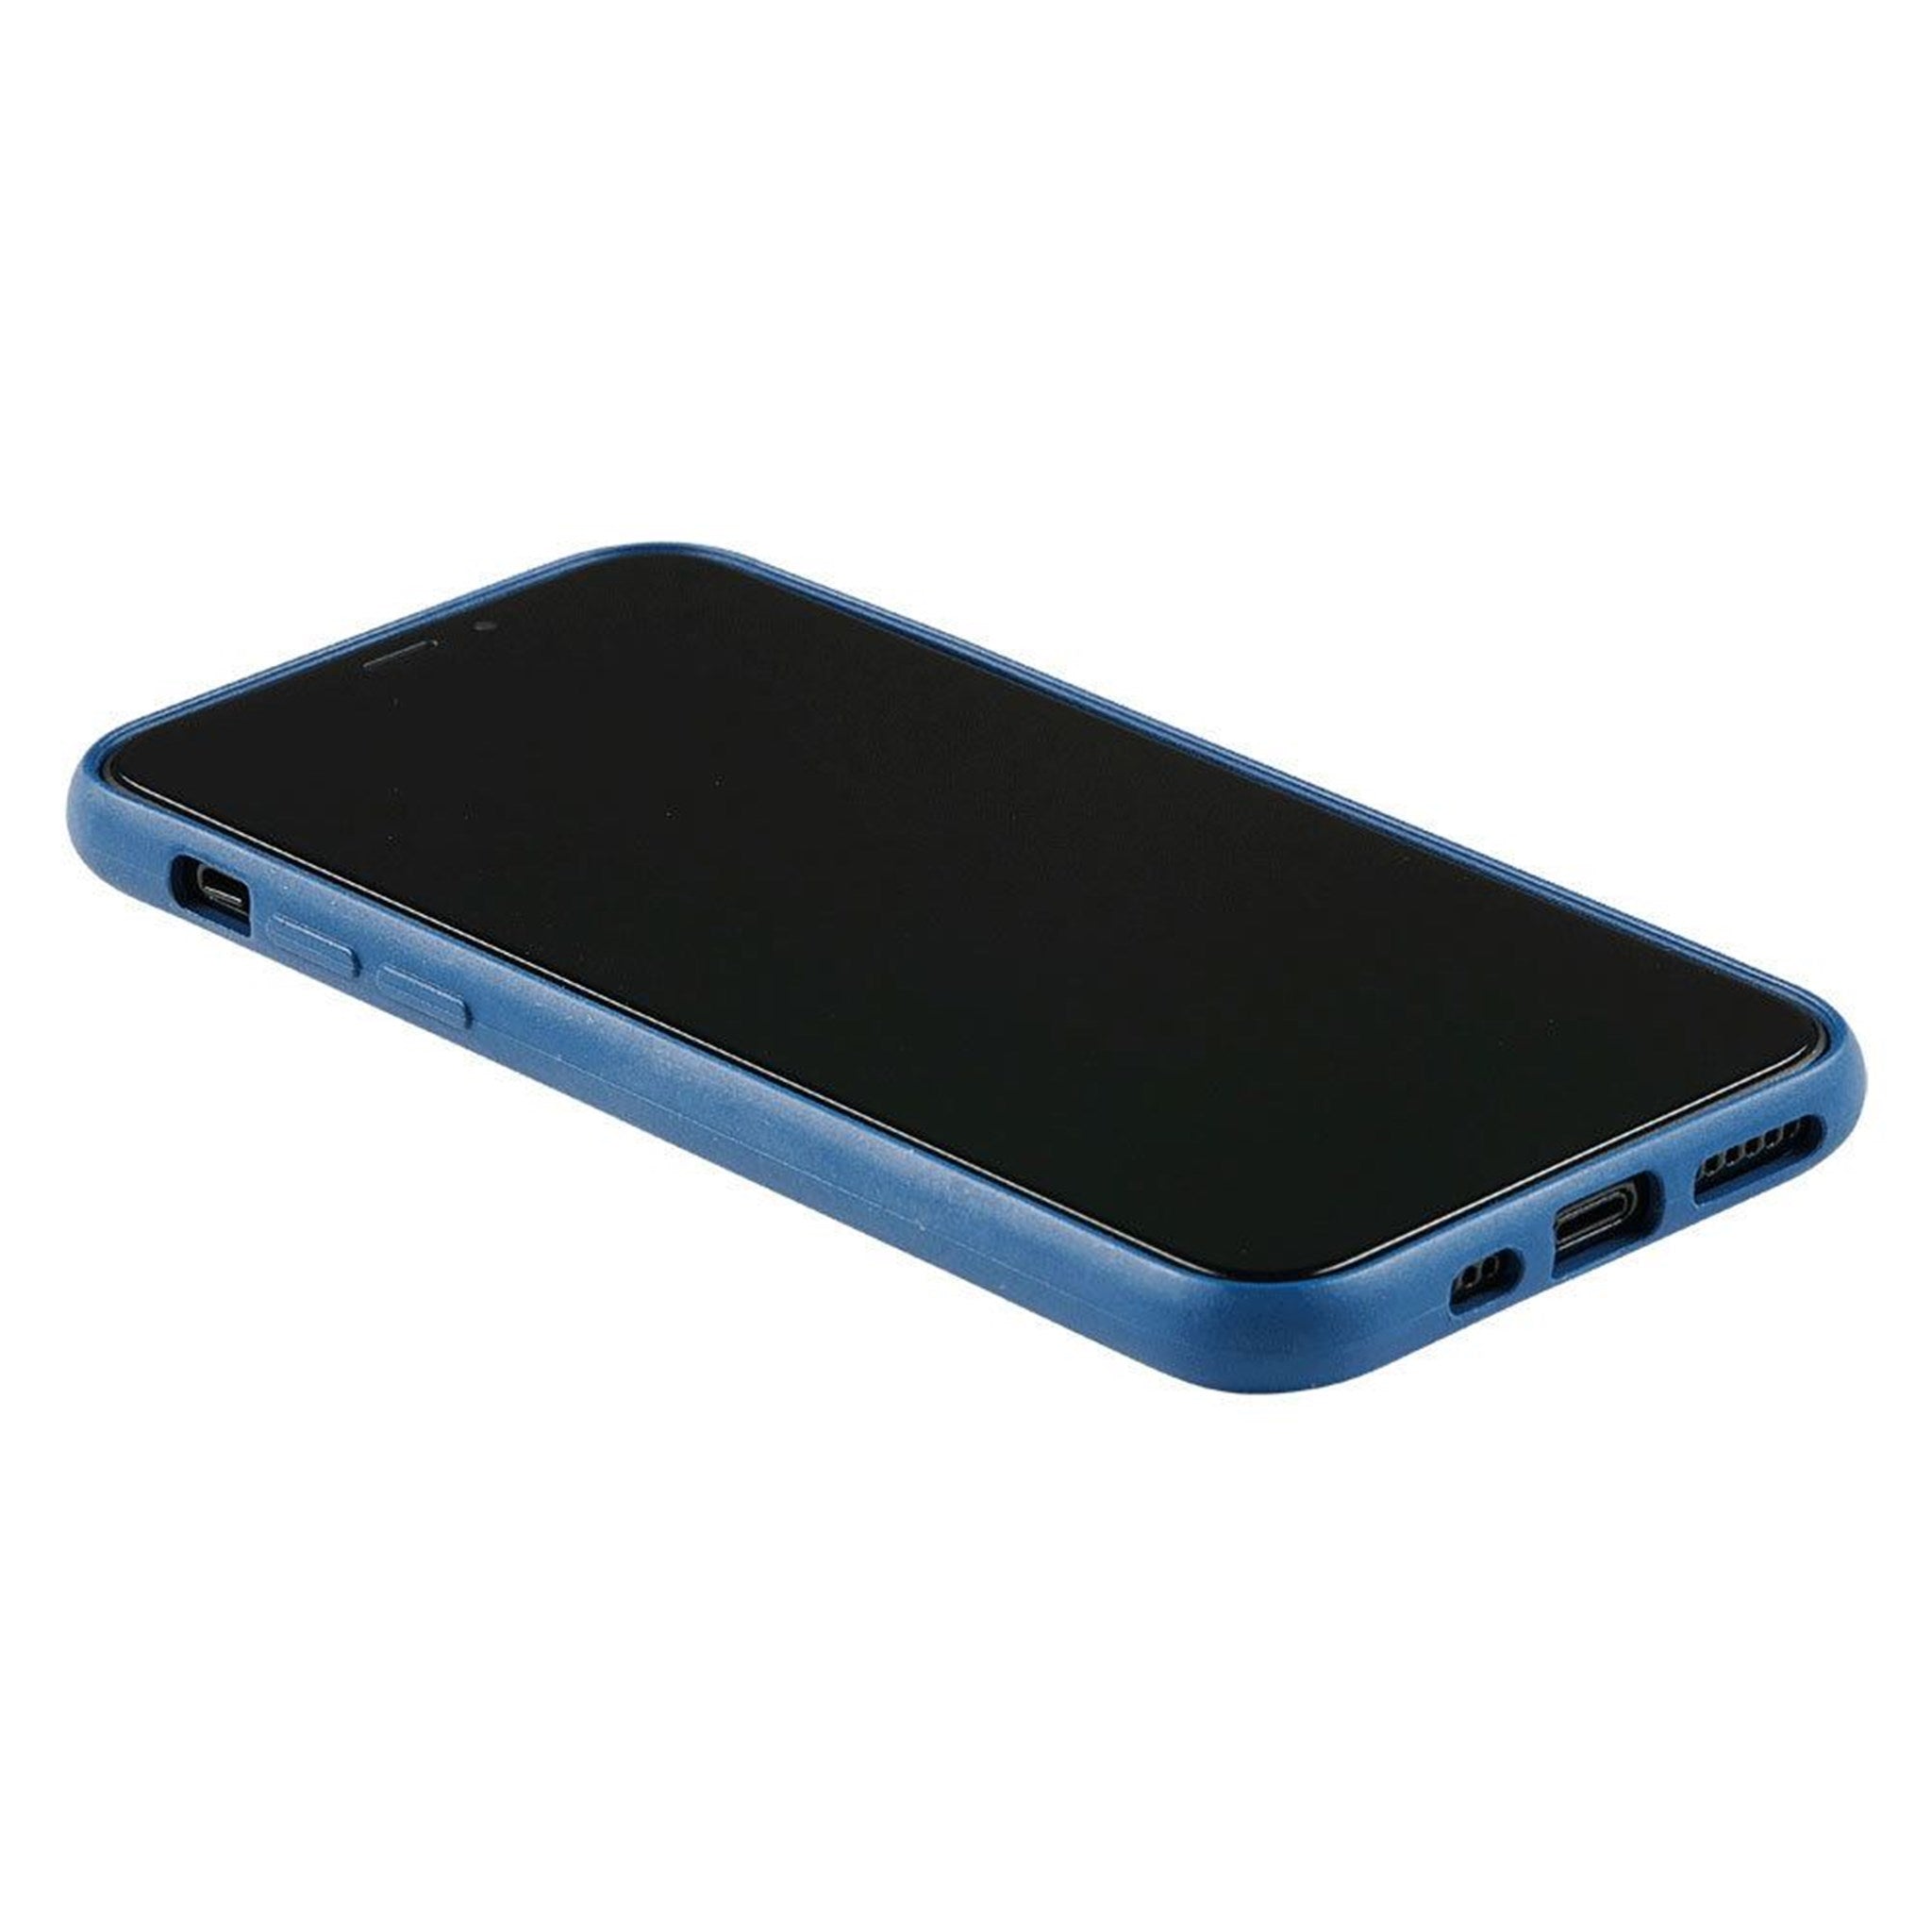 GreyLime-iPhone-11-Pro-biodegradable-cover-Navy-blue-COIP11P03-V3.jpg